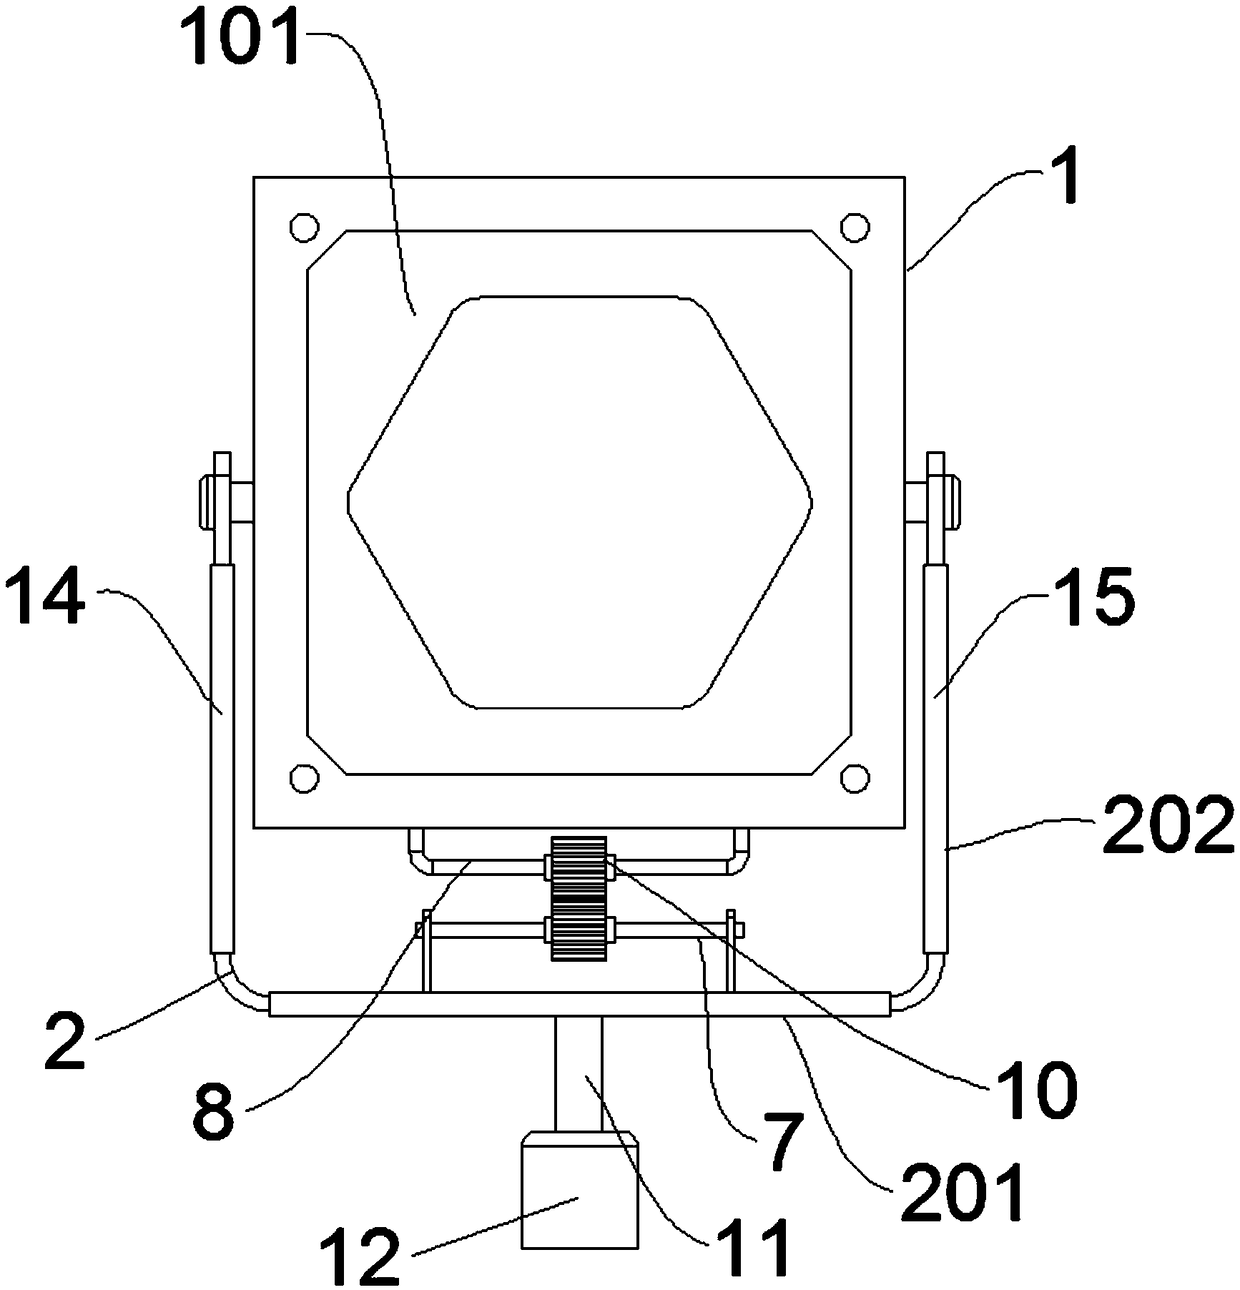 Projection lamp assembly